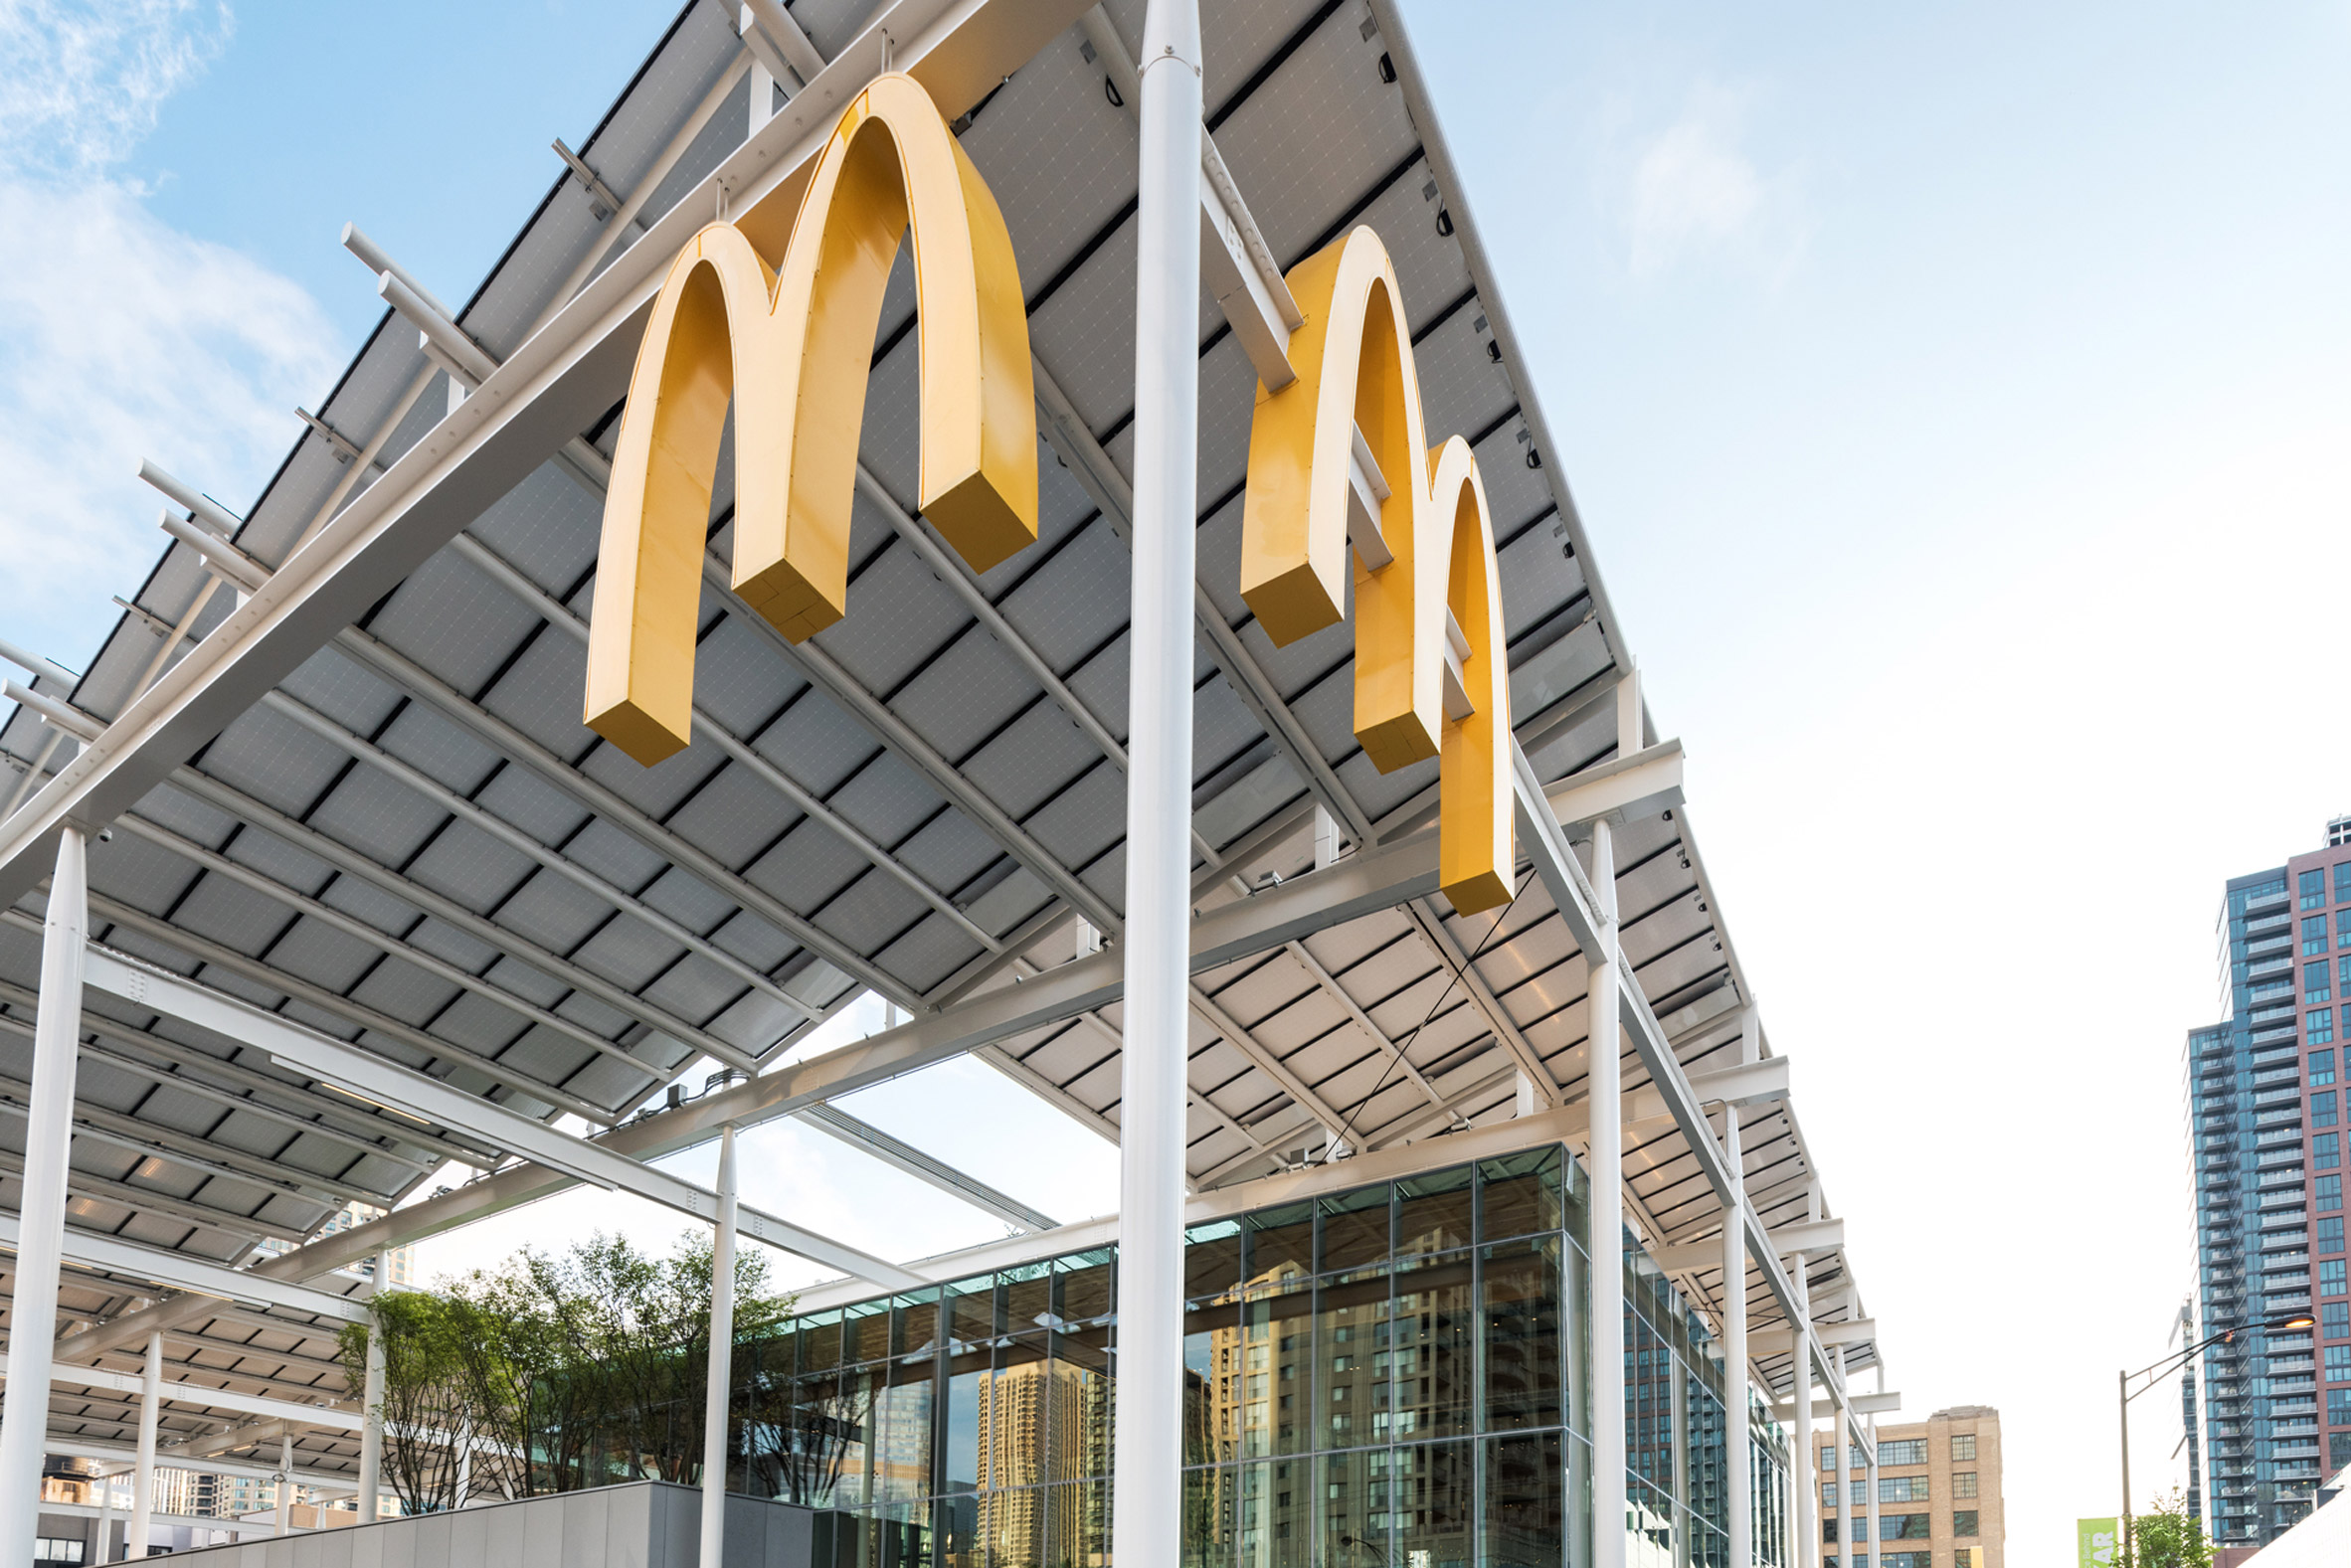 McDonald's Chicago by Ross Barney Architects